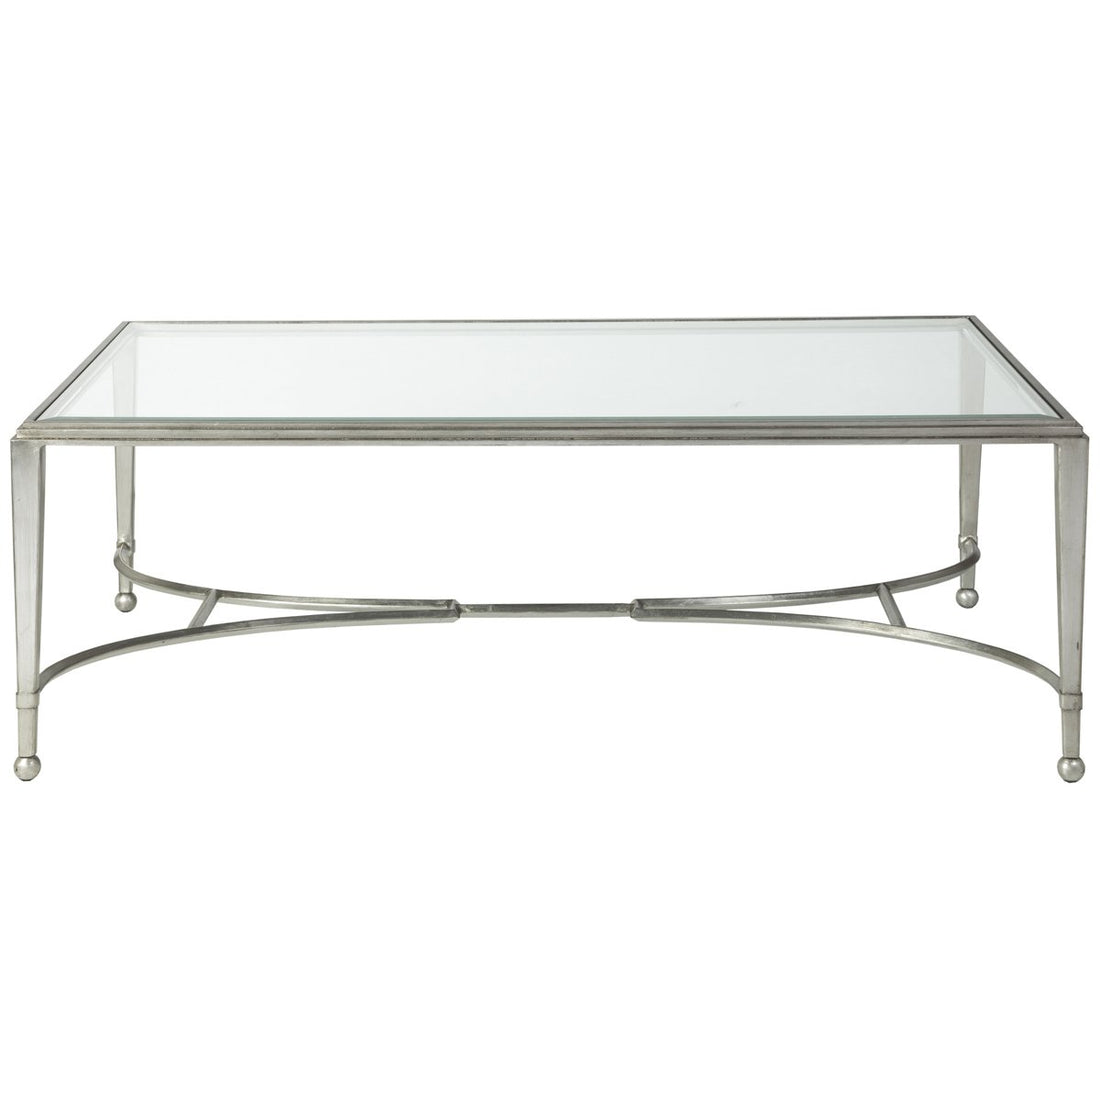 Artistica Home Sangiovese Large Rectangular Cocktail Table 2011-949